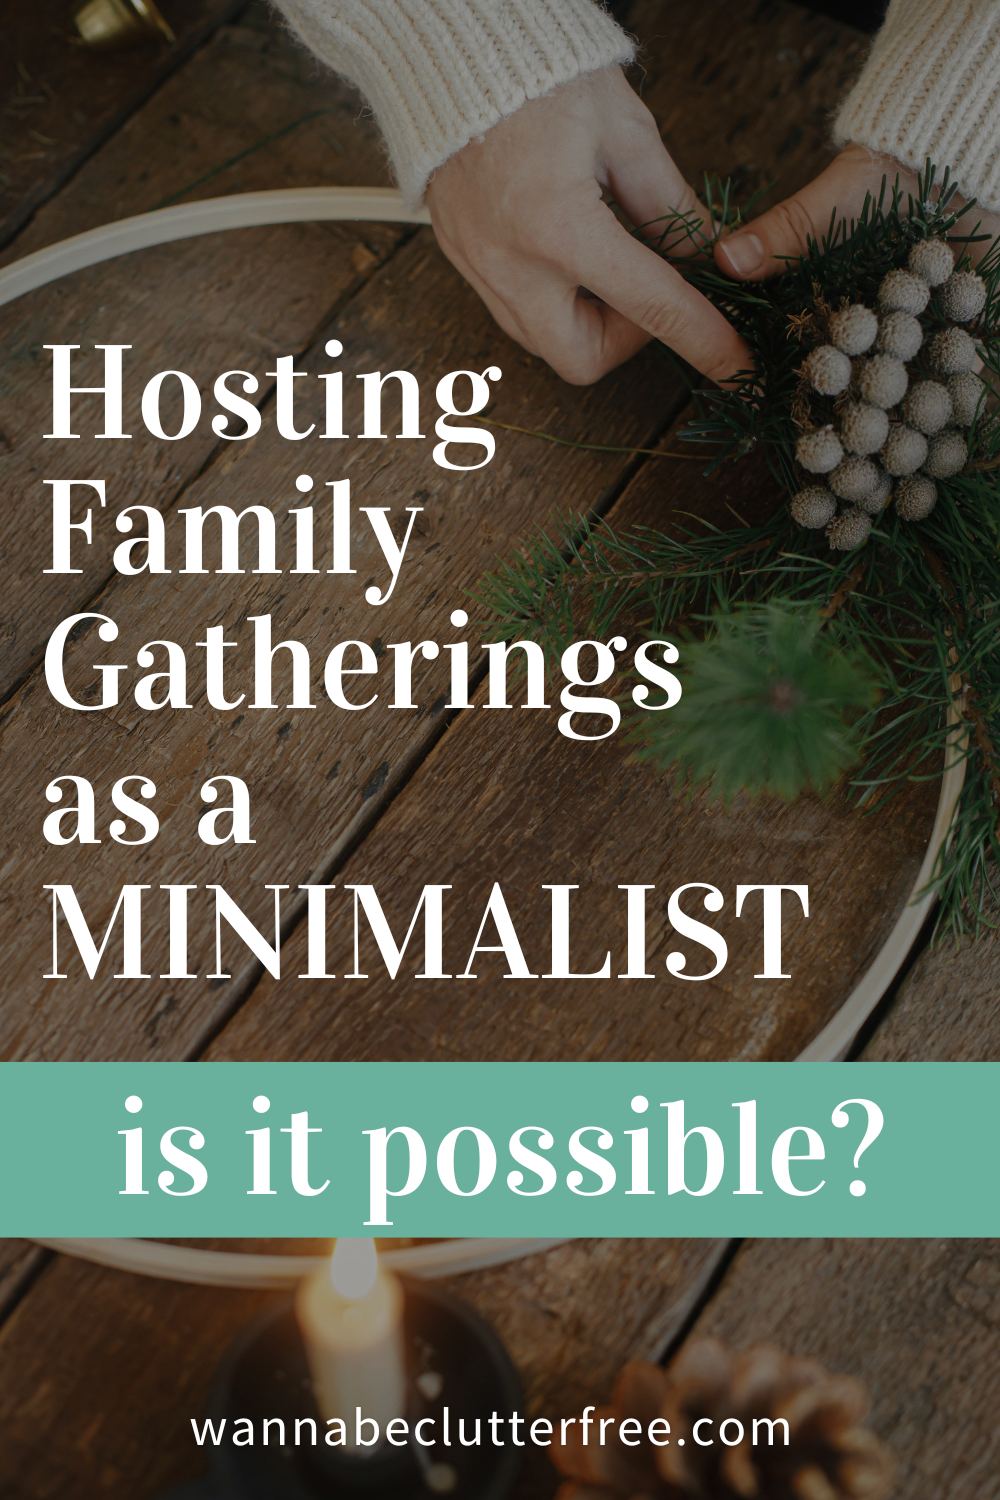 Hosting family gatherings as a minimalist - is it possible?